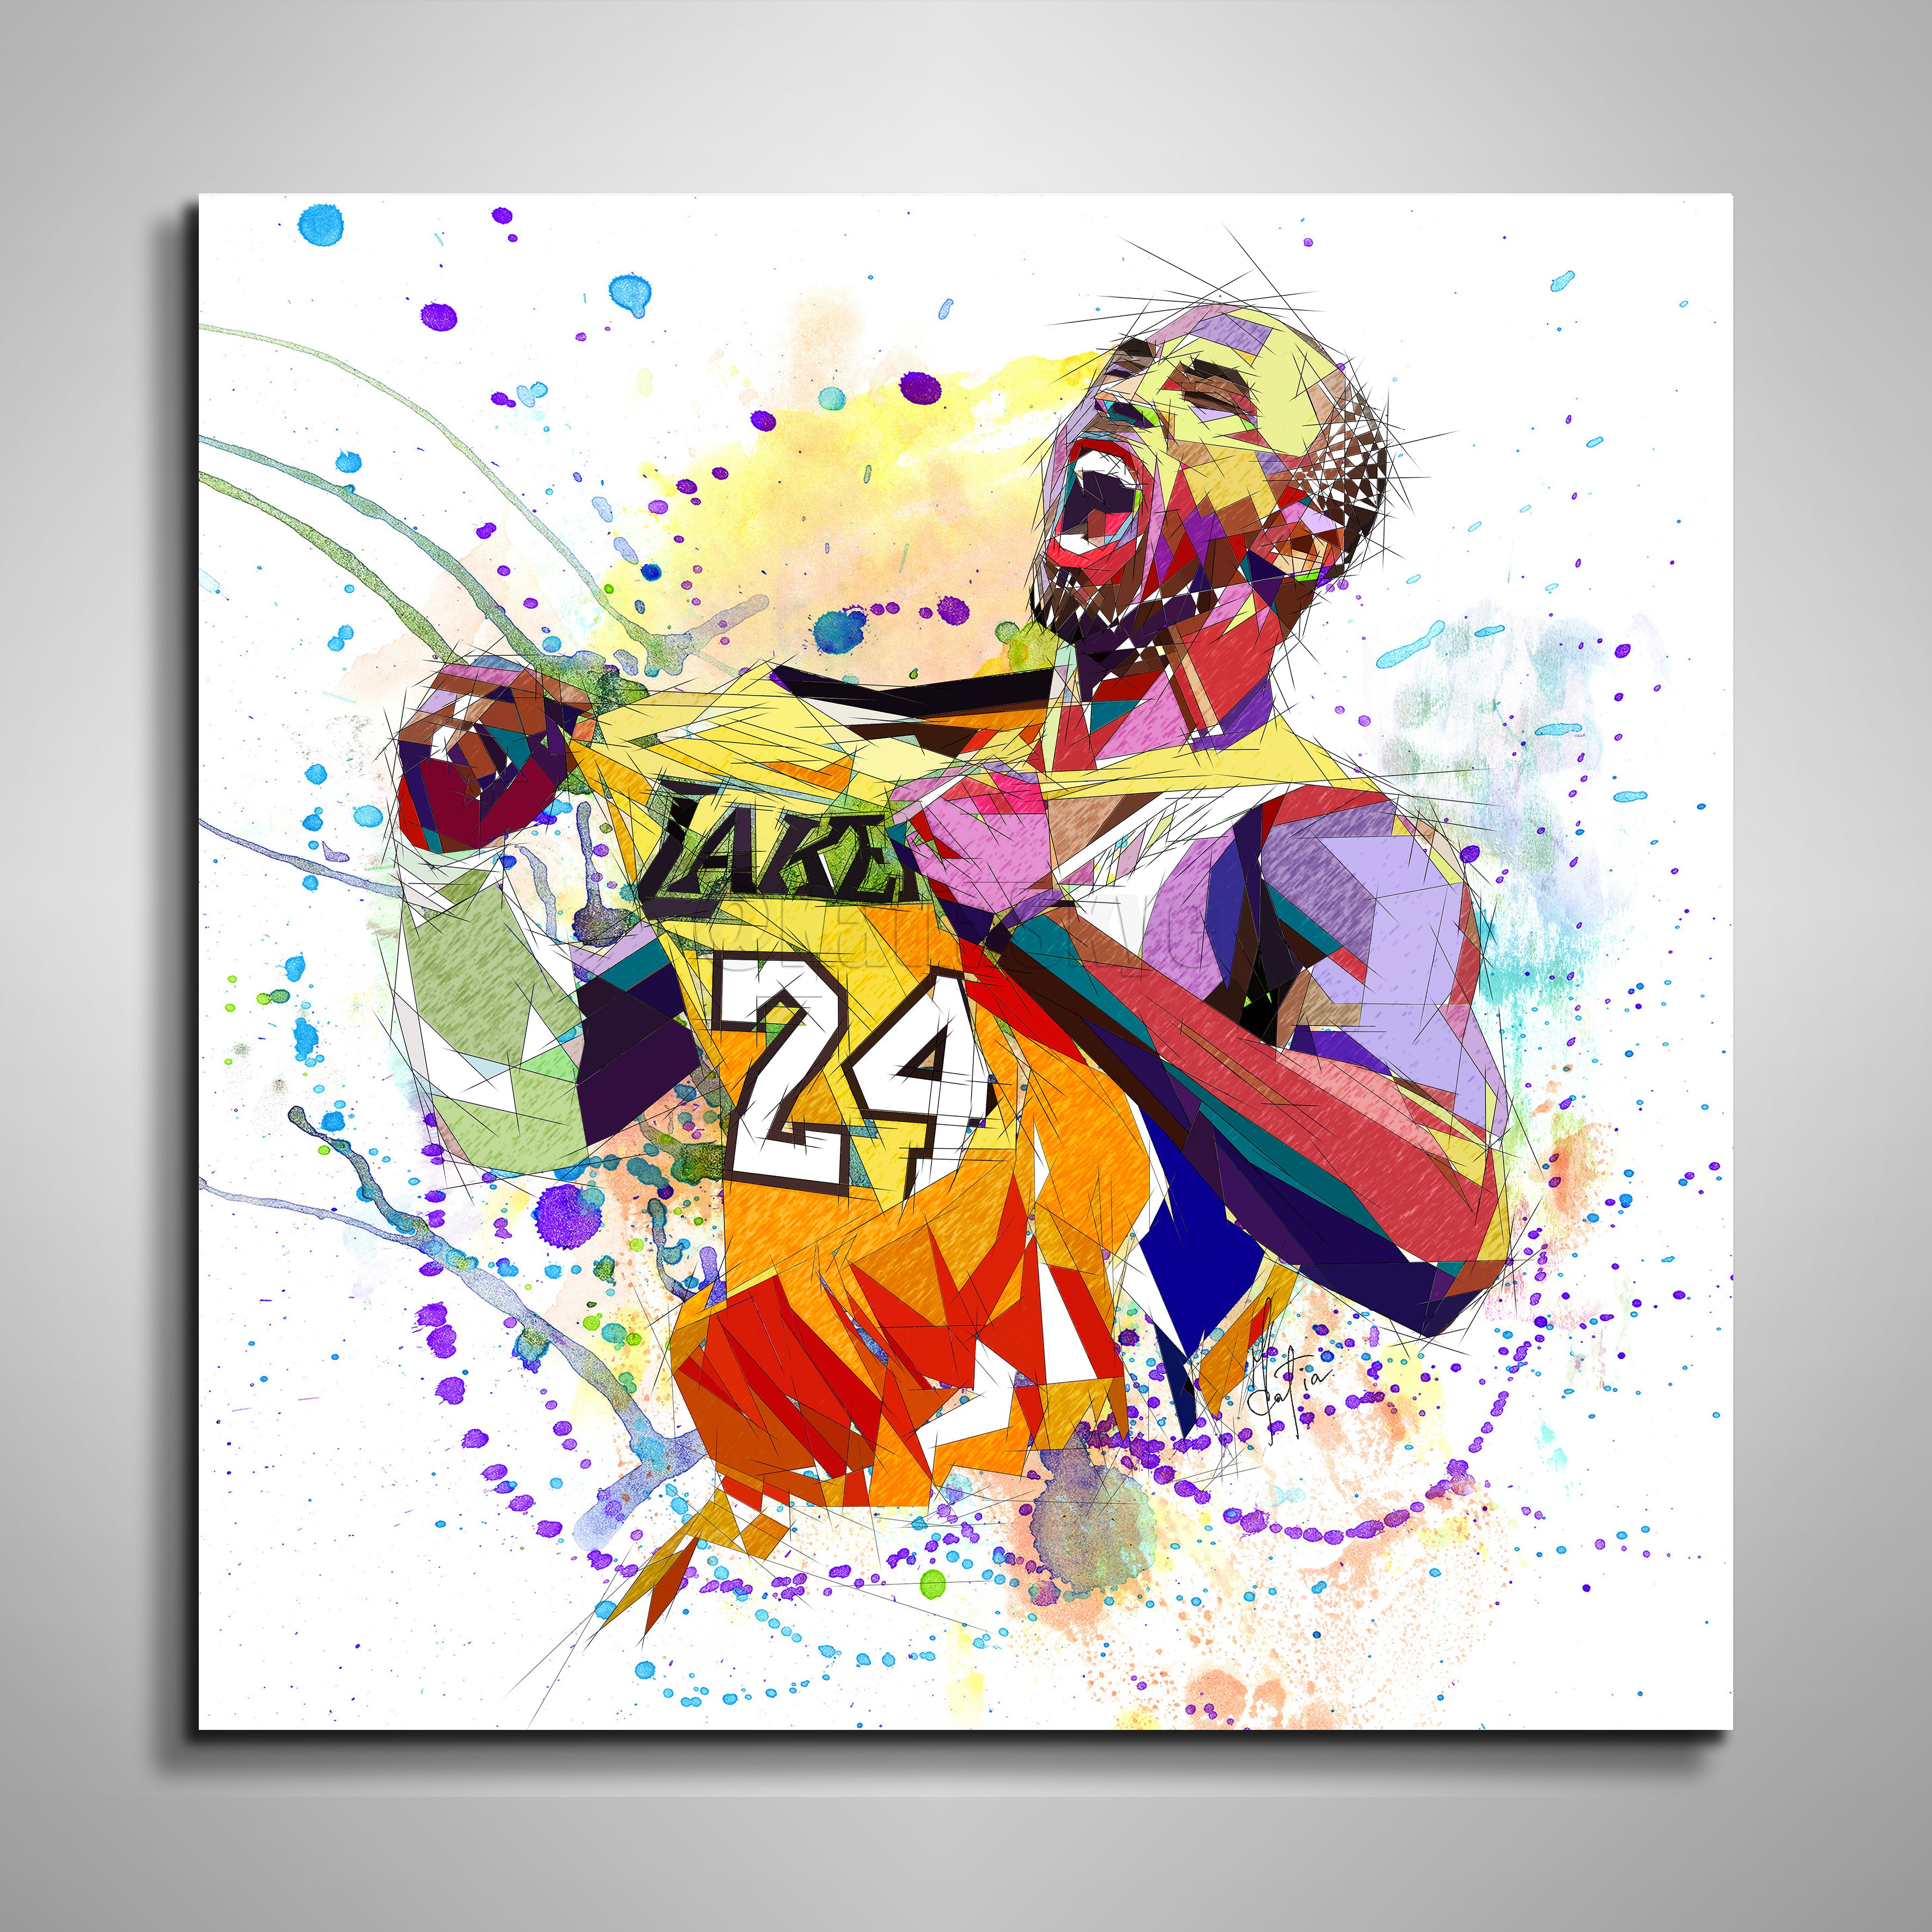 ABSTRACT BASKETBALL WALL ART INSPIRED BY KOBE BRYANT IN ACTION // NBA-KB01